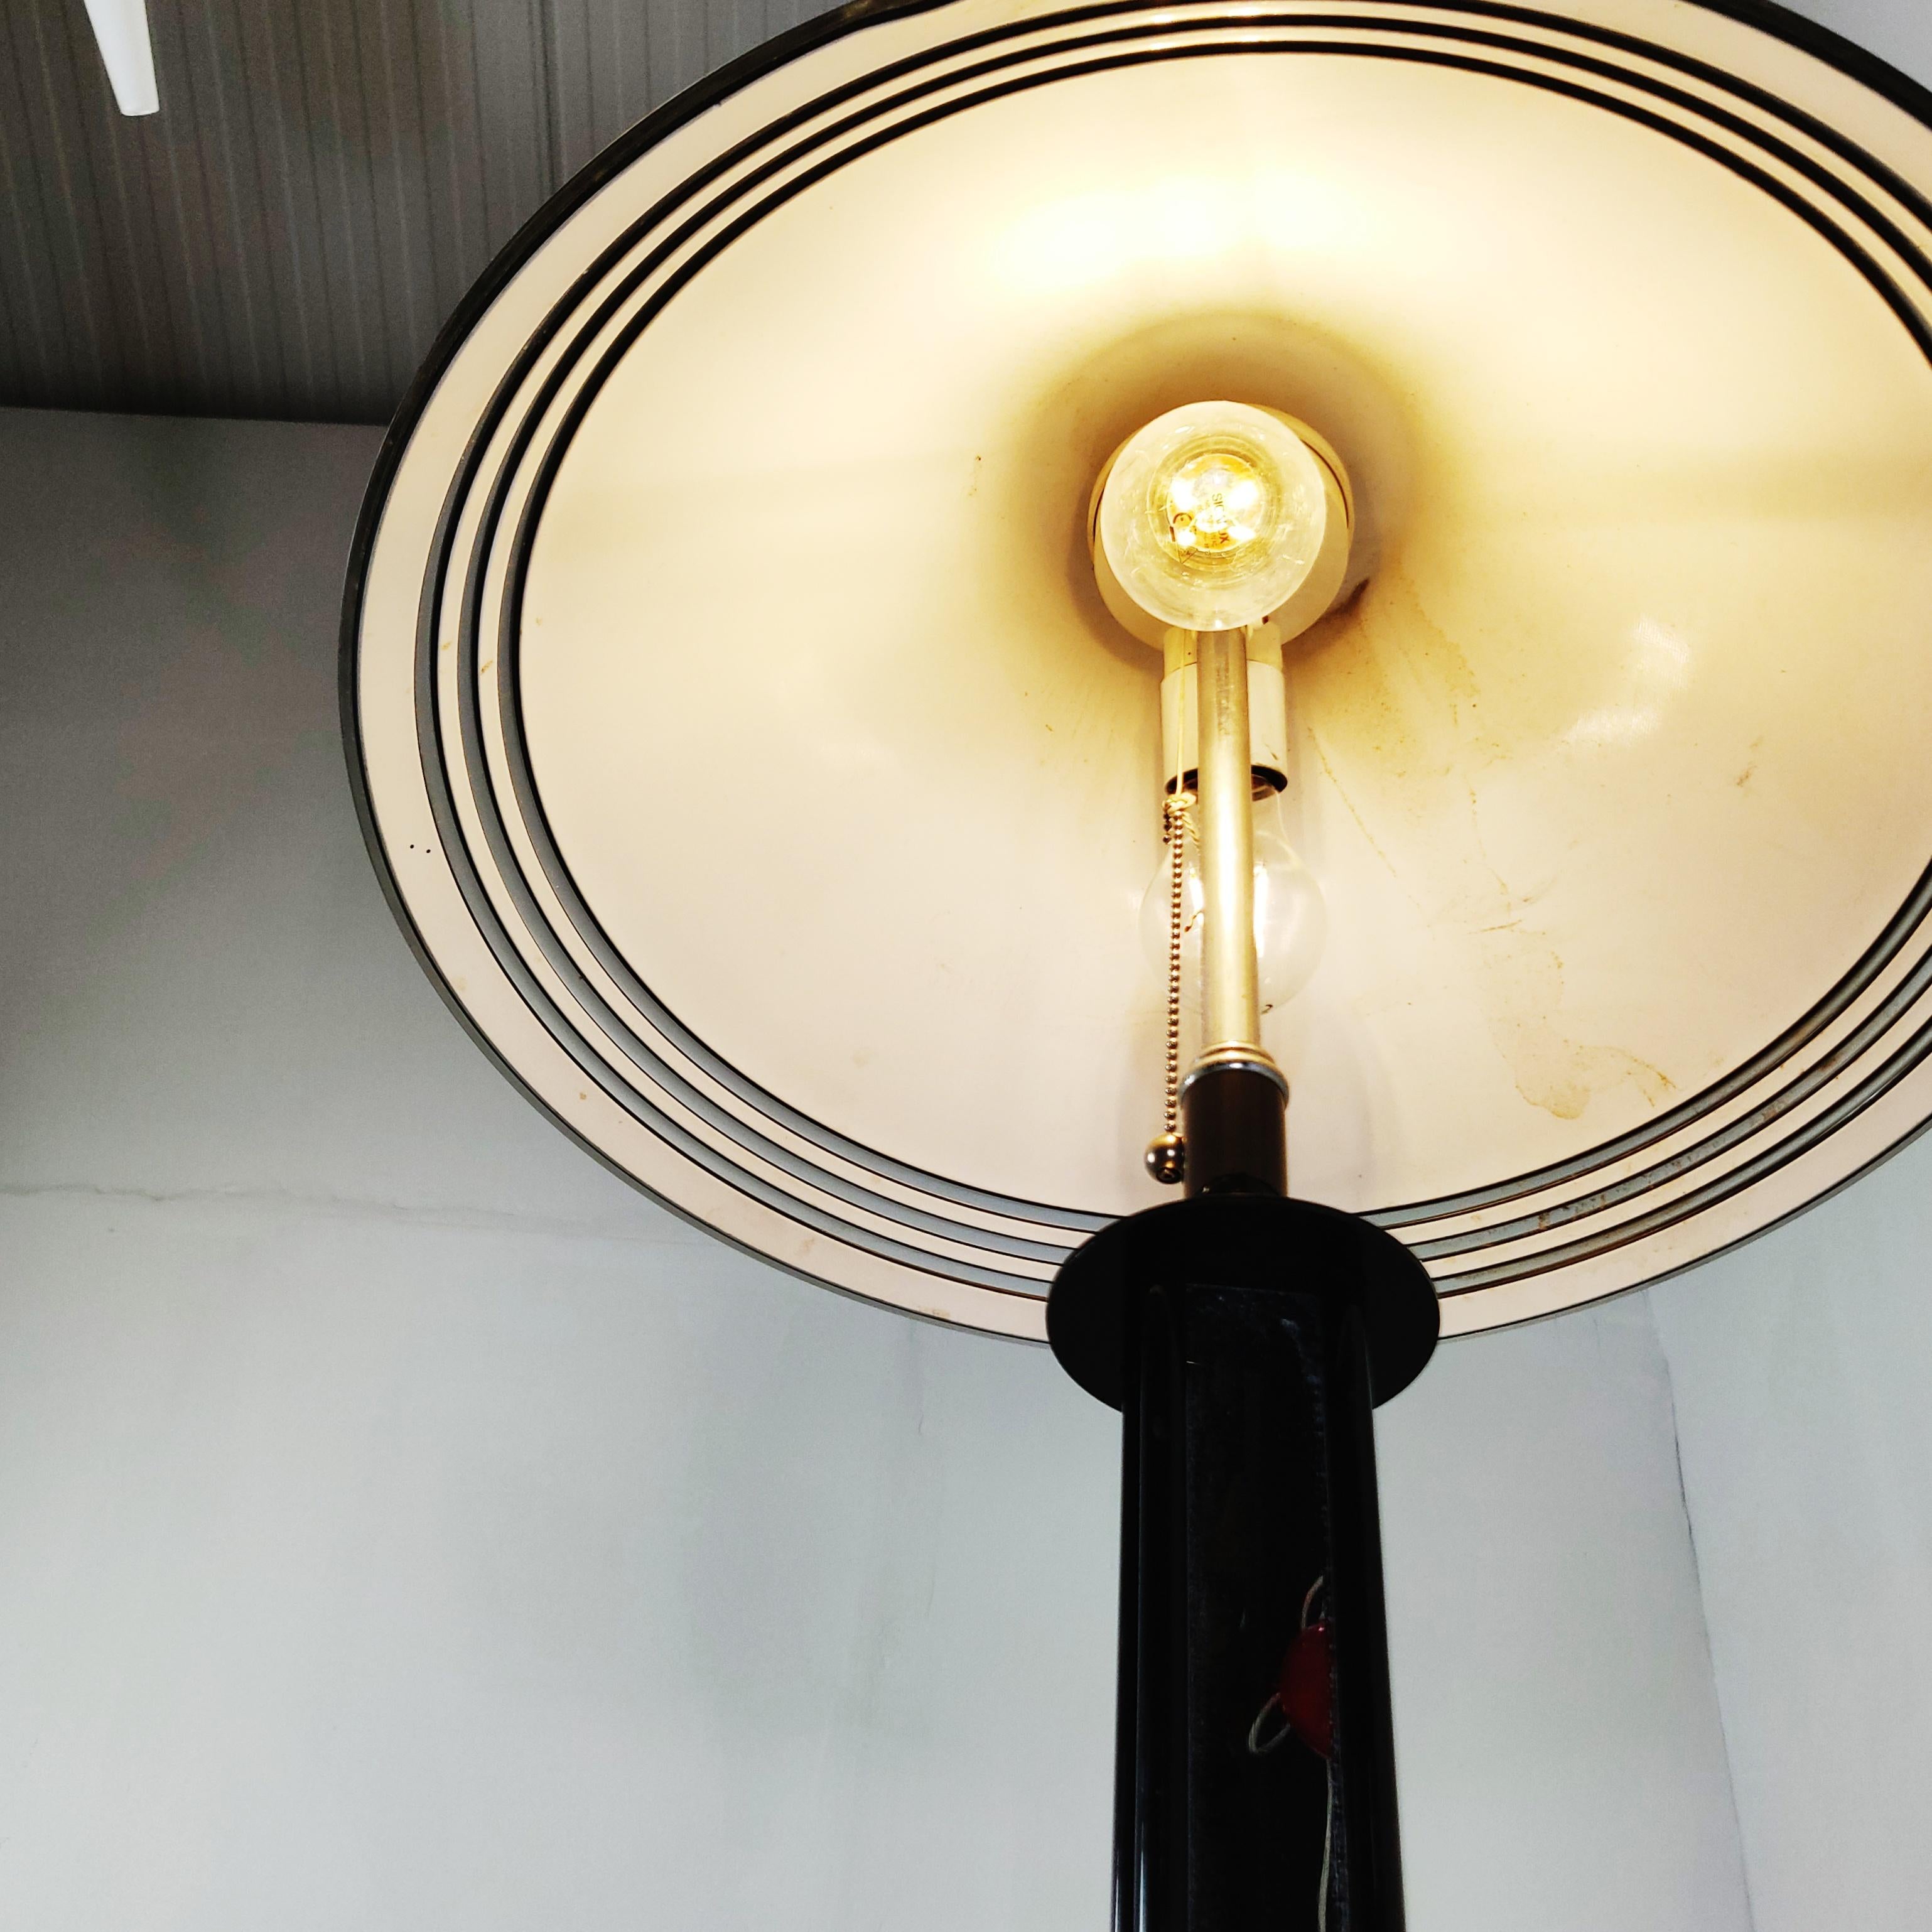 20th Century Hollywood Regency Floor Lamp in style of Willy Rizzo. For Sale 5